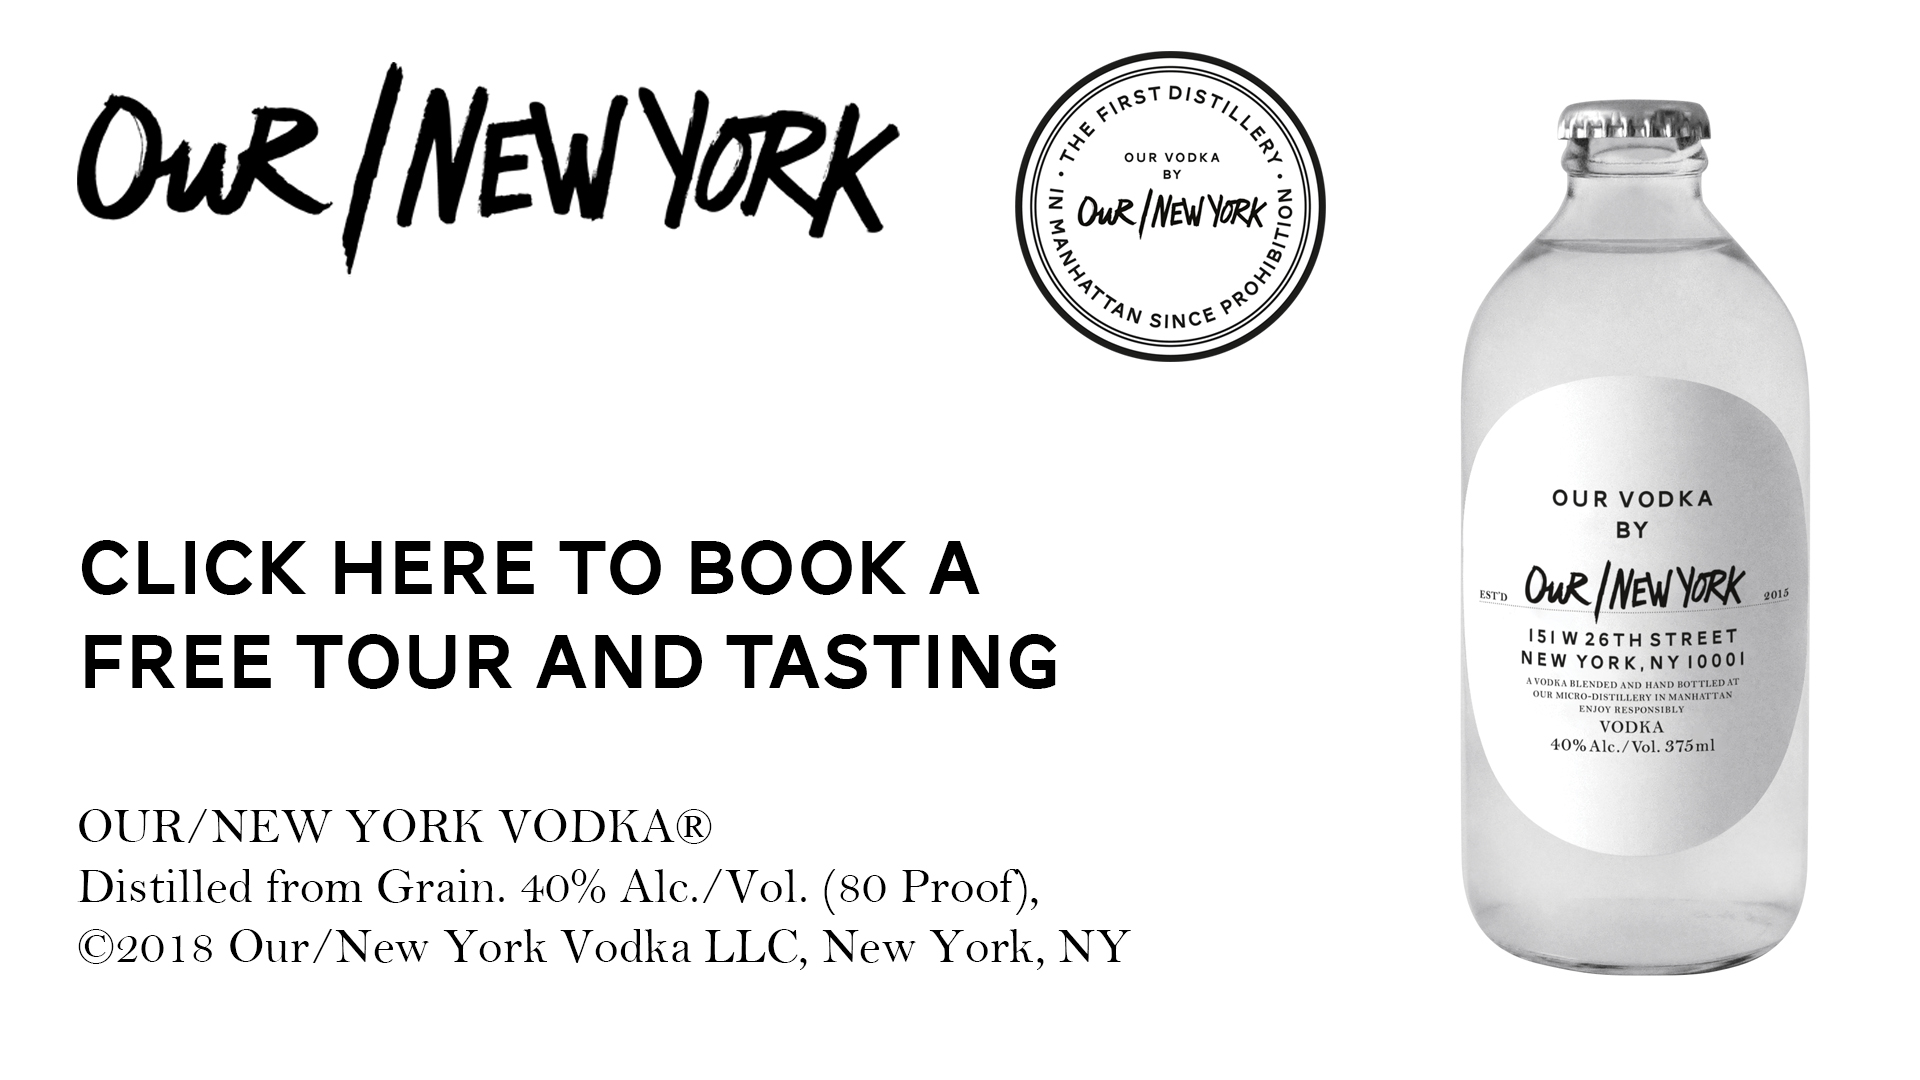 Book a free tour and tasting